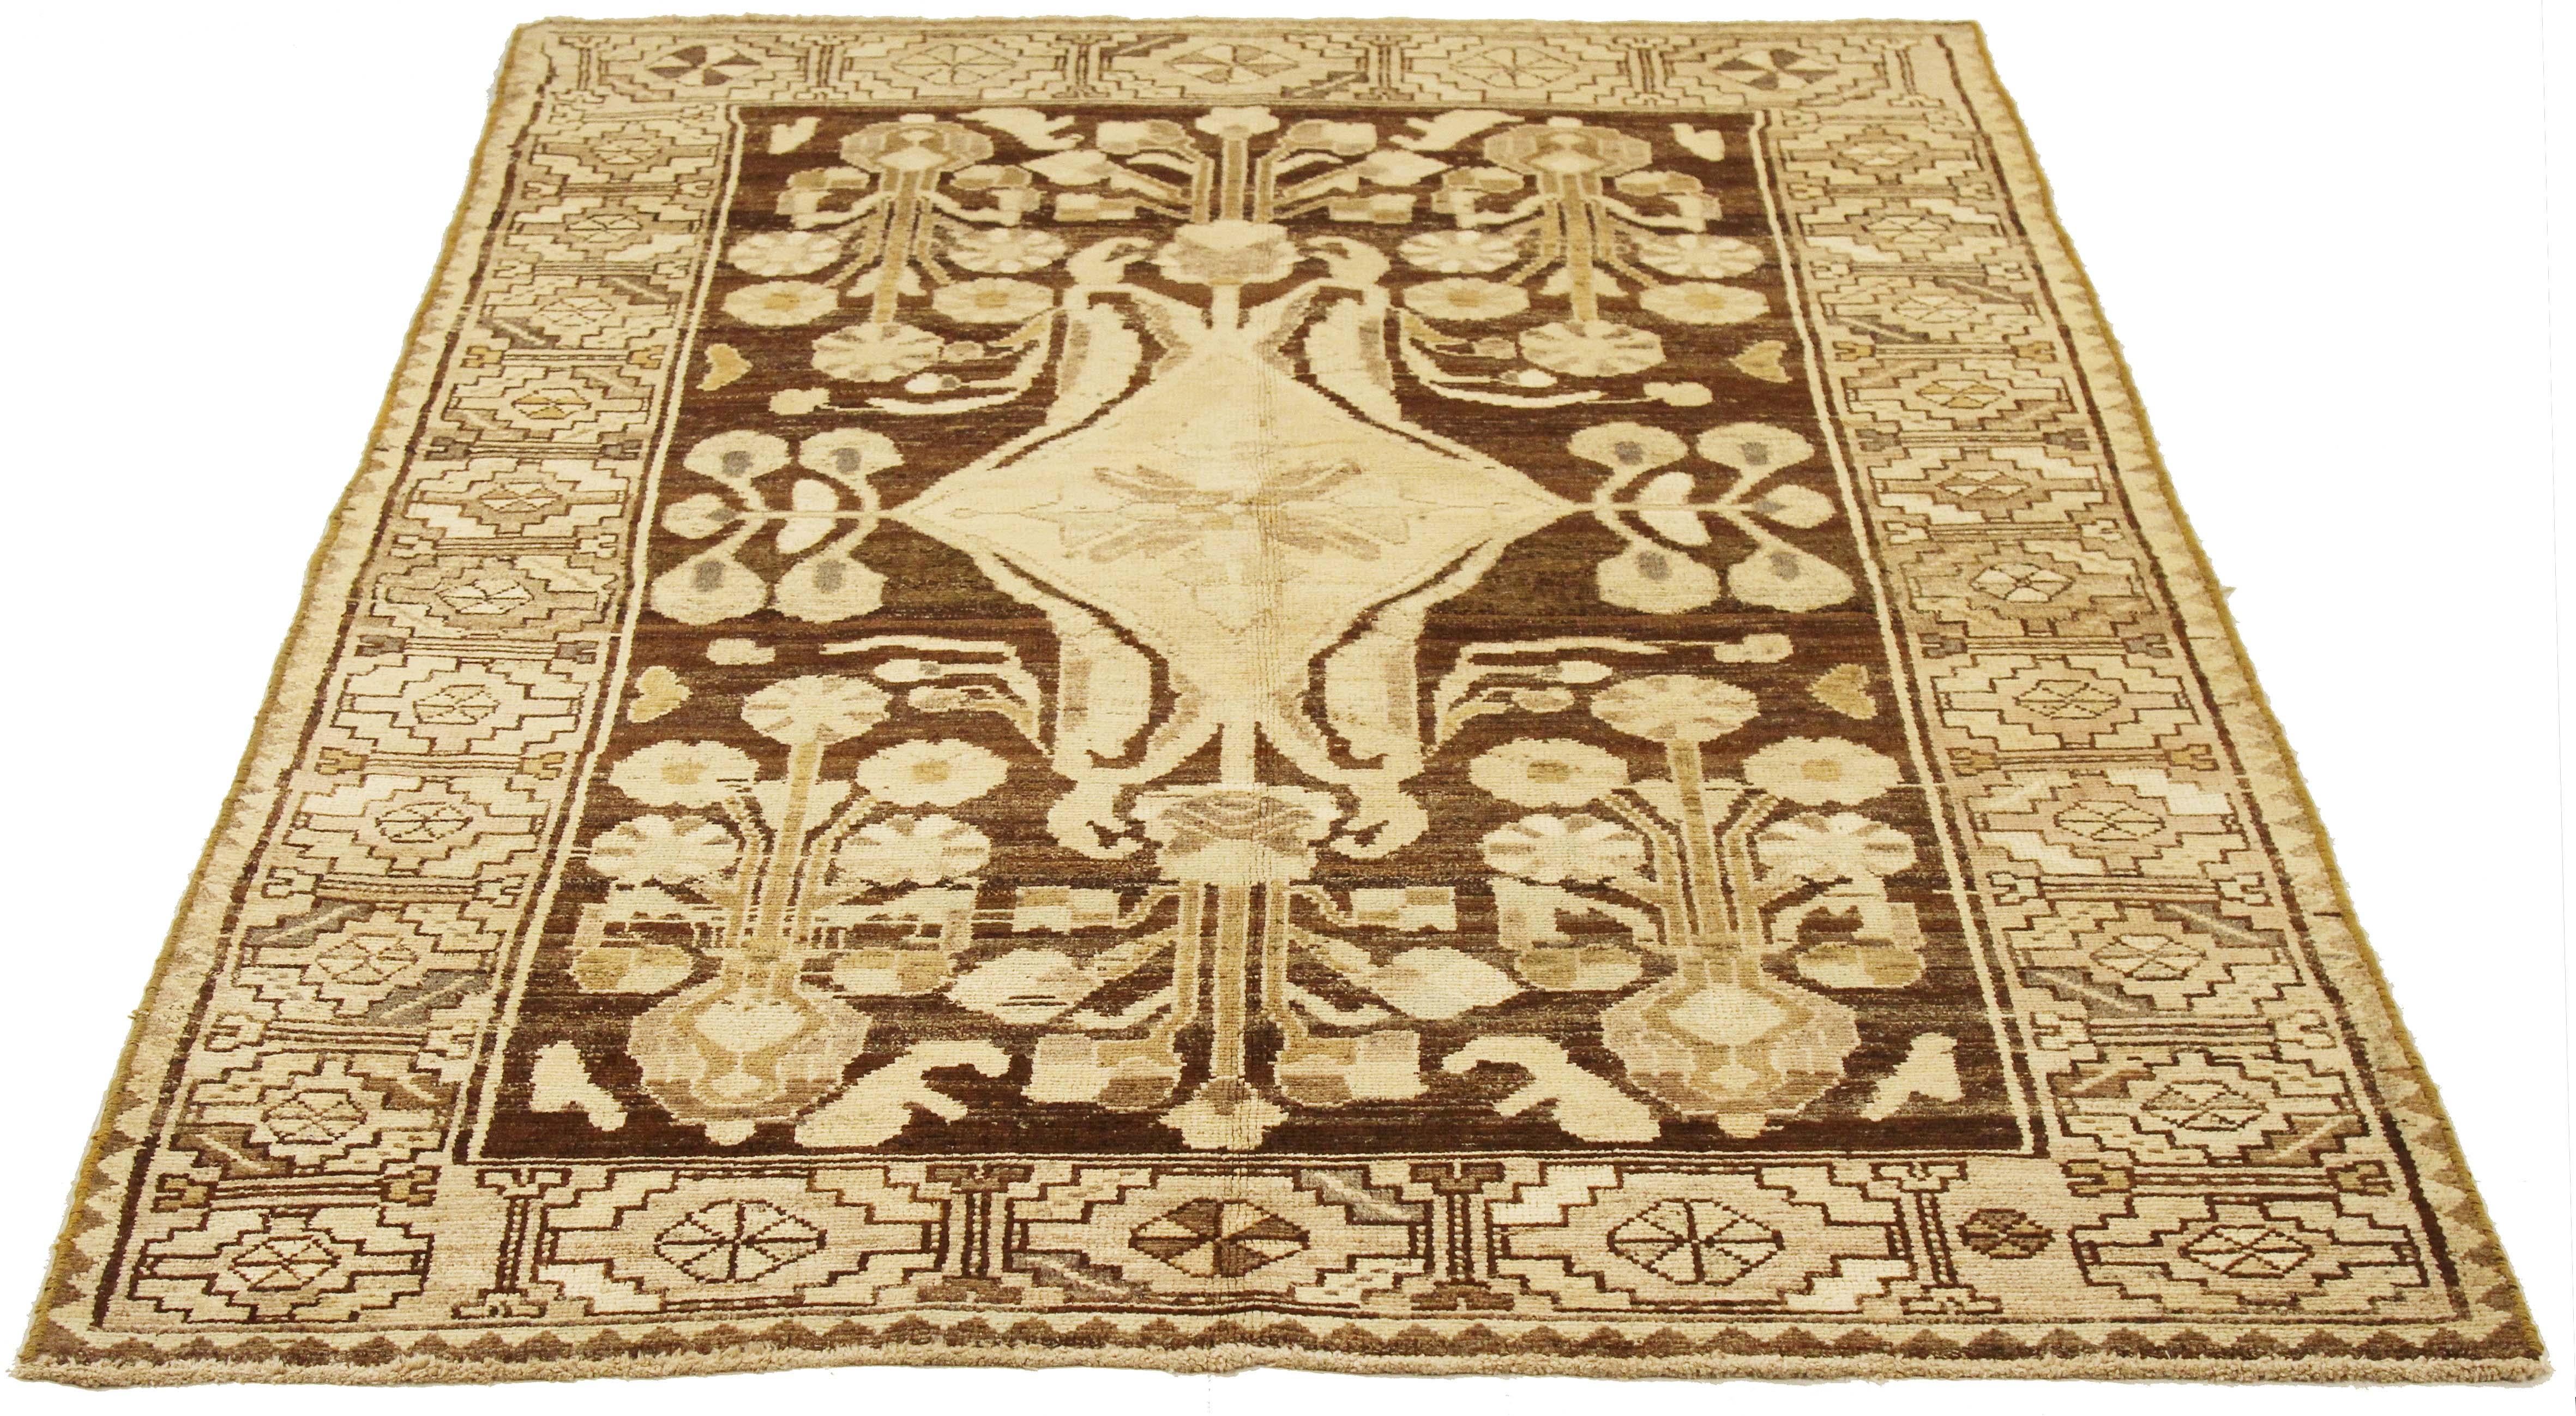 Antique Persian rug handwoven from the finest sheep’s wool and colored with all-natural vegetable dyes that are safe for humans and pets. It’s a traditional Malayer design featuring ivory and beige botanical details over a brown field. It’s a lovely